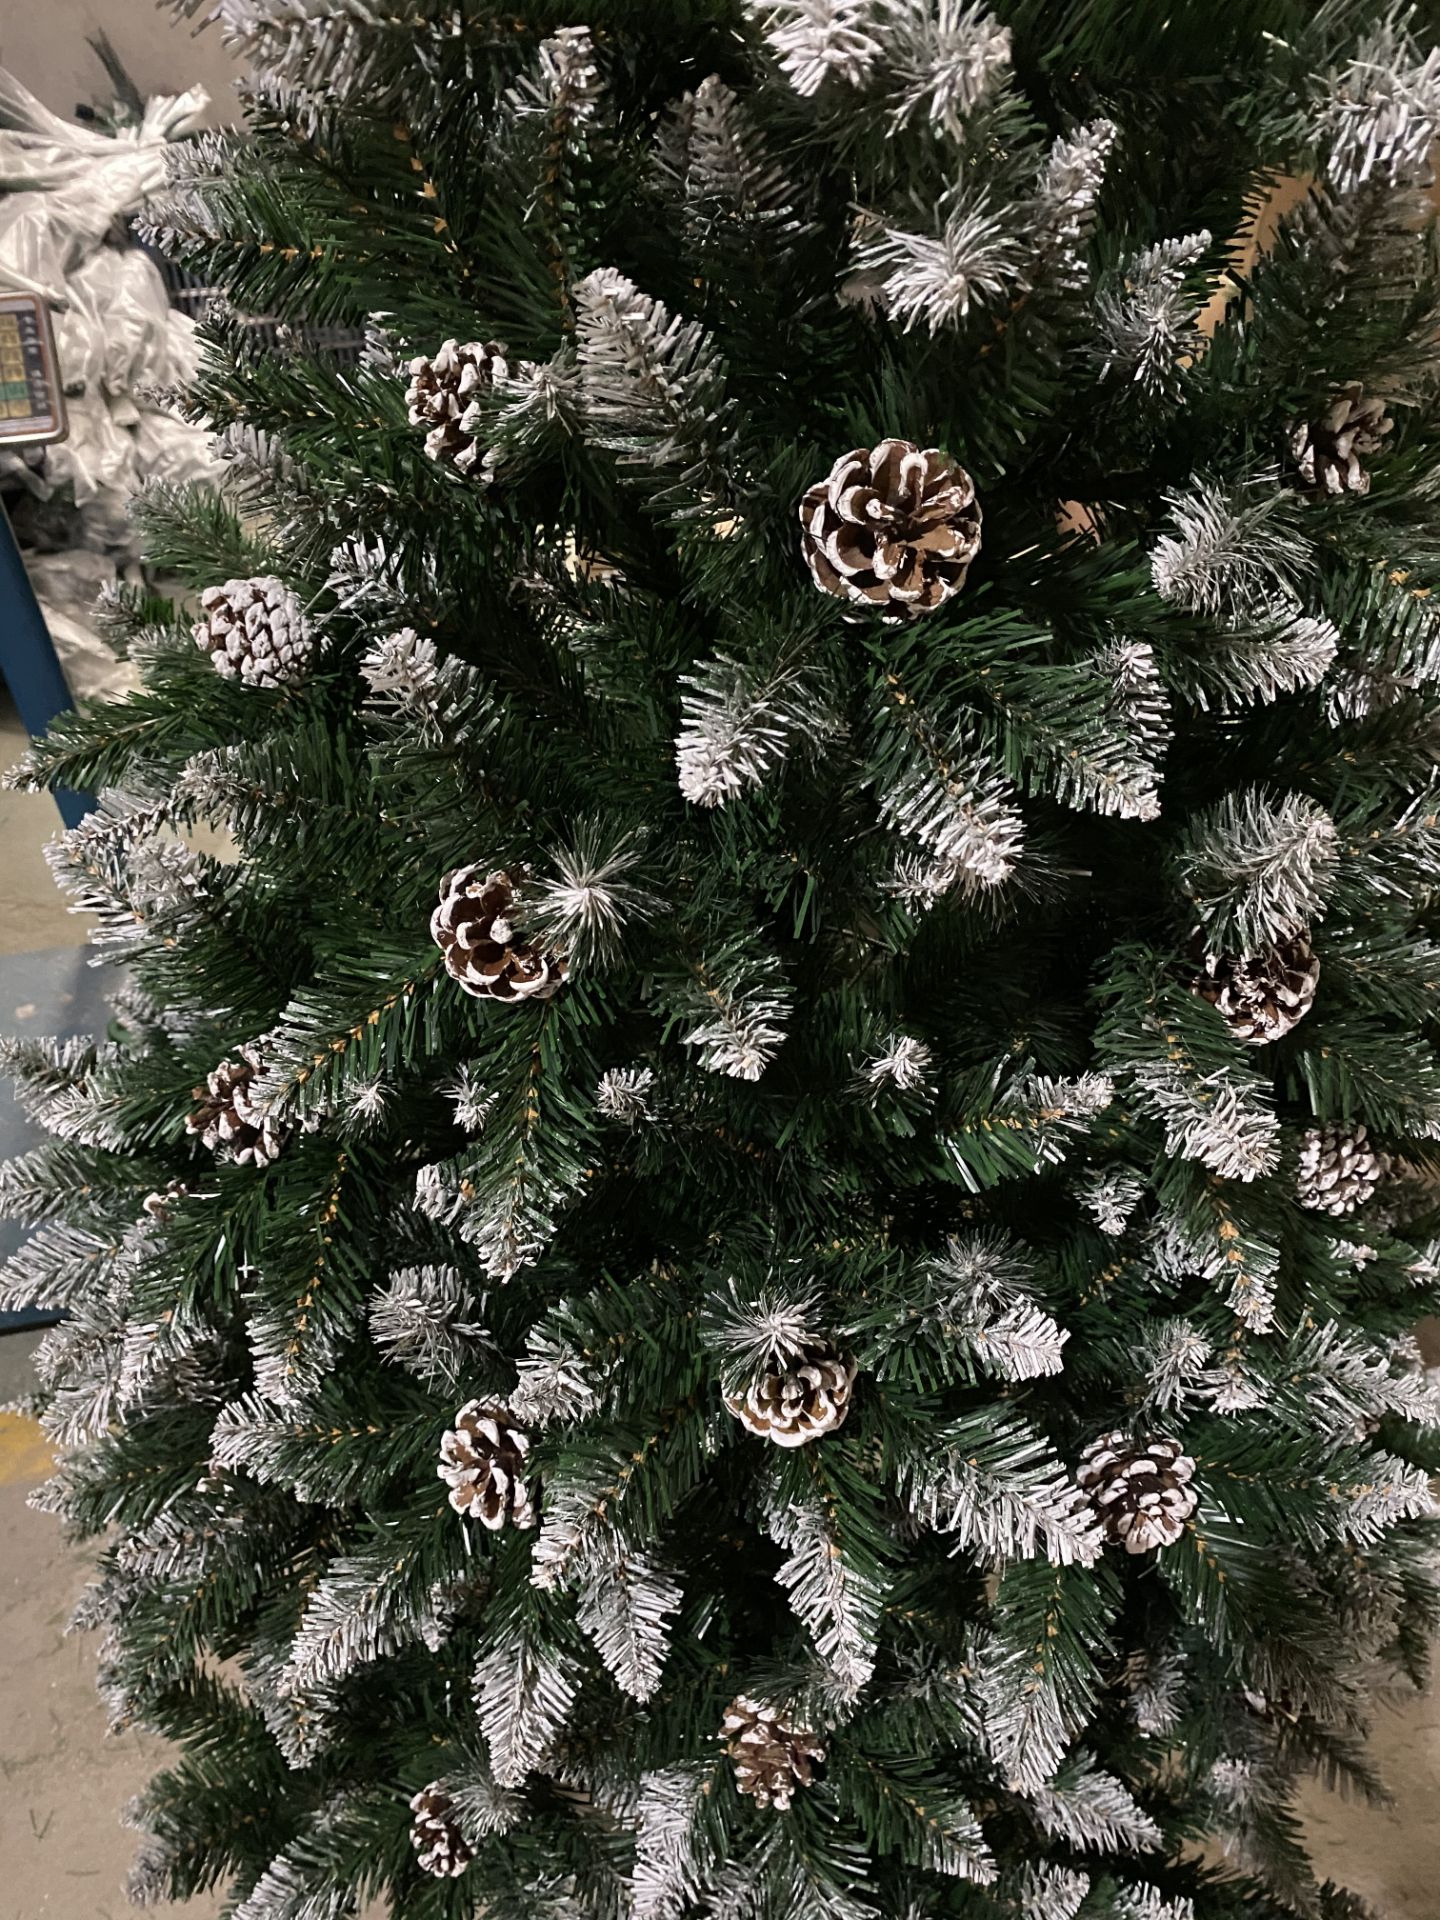 5 x Christmas Tree Artificial with Snow Frosted Tips and Pine Cones 5ft - Image 2 of 4